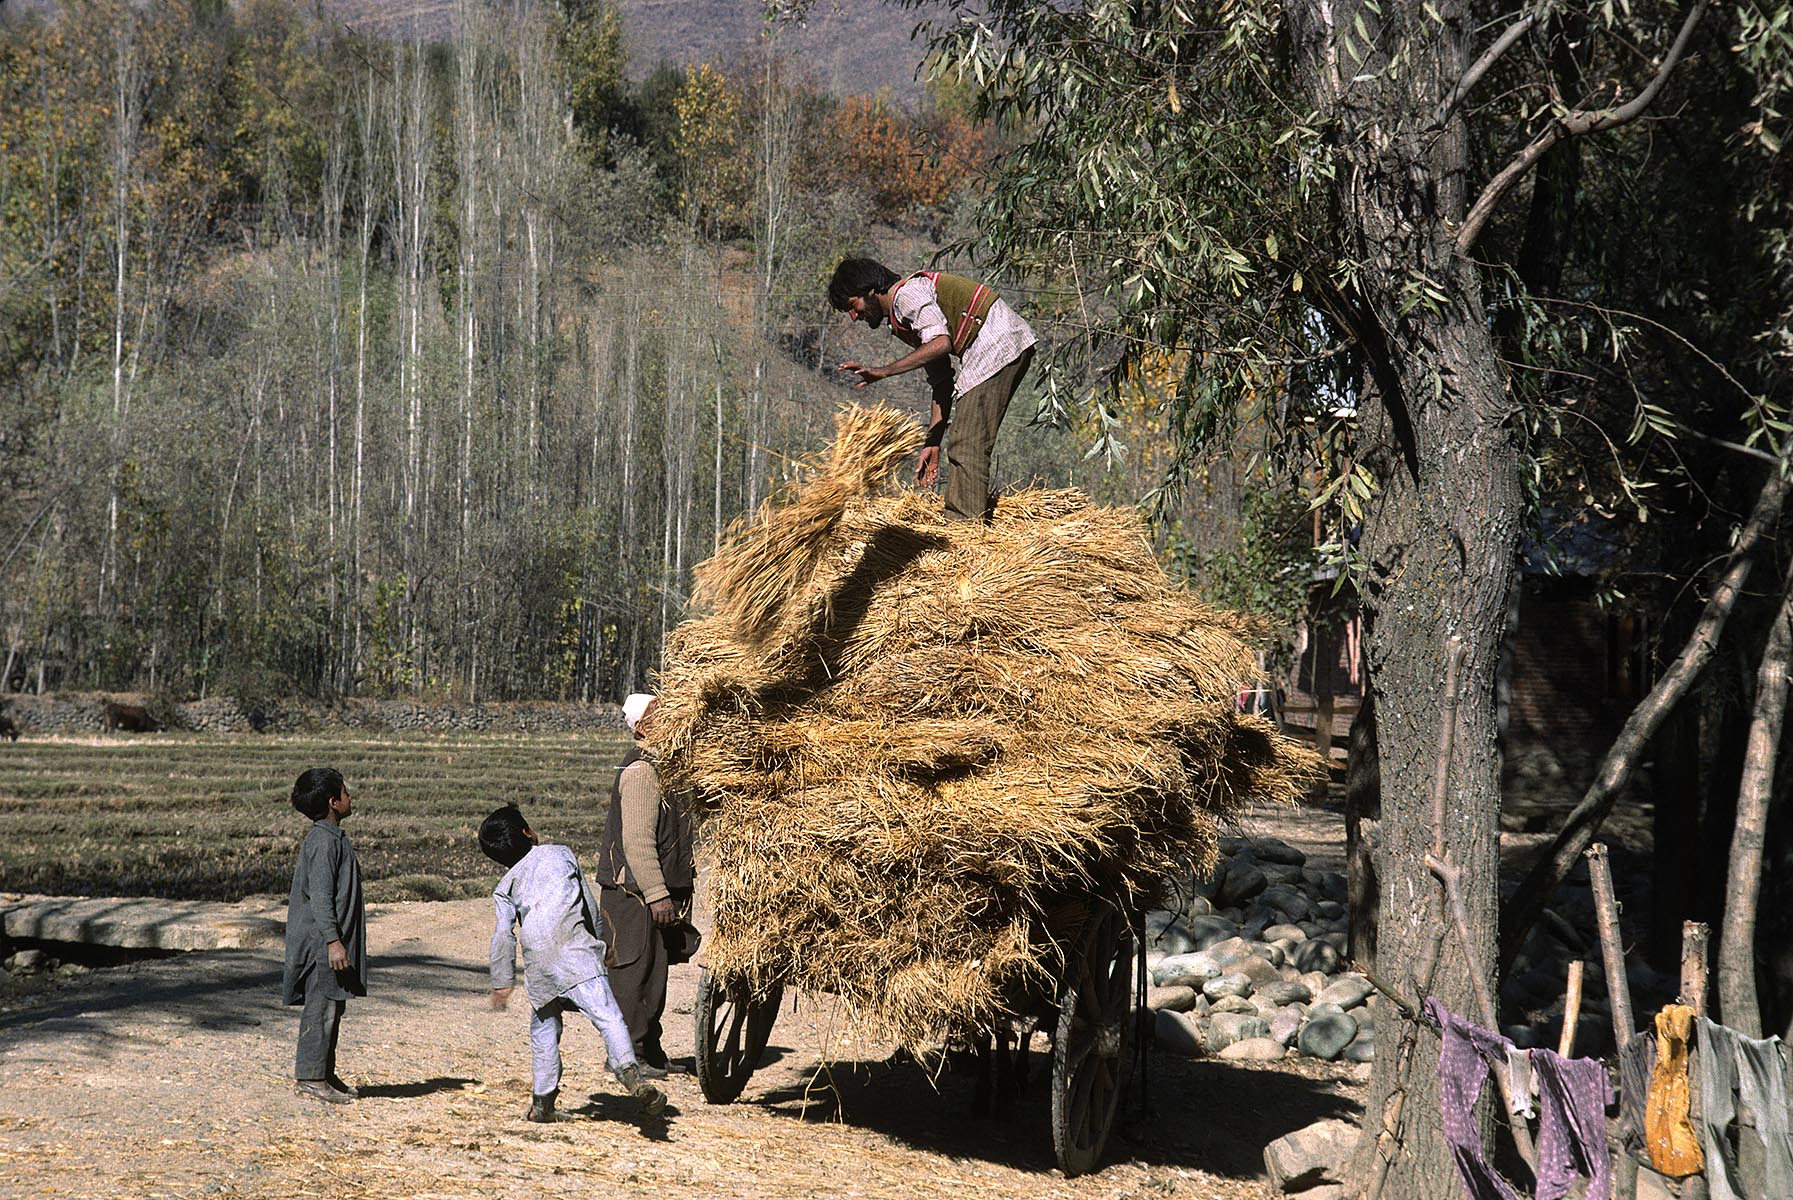 KASHMIRI MAN stands ona pile of HARVESTED WHEAT on top of a traditional WOODEN CART - KASHMIR, INDIA